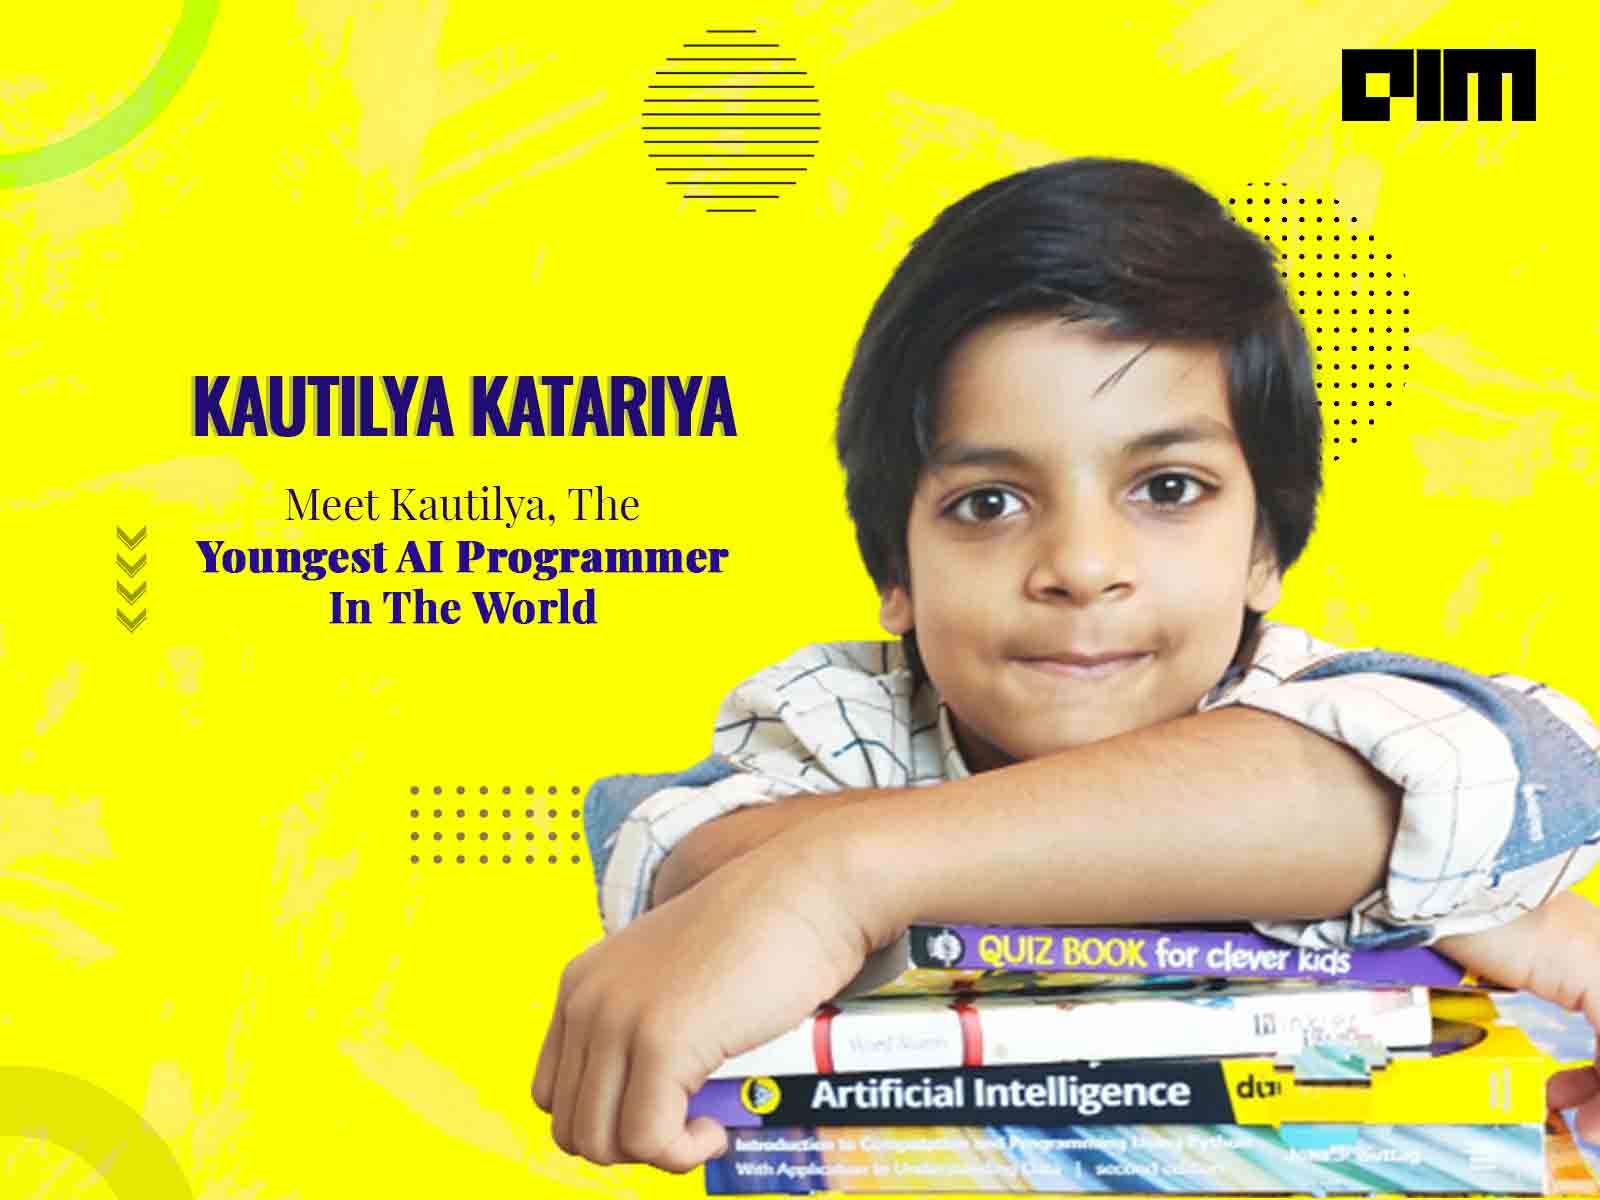 Meet Kautilya, The Youngest AI Programmer In The World